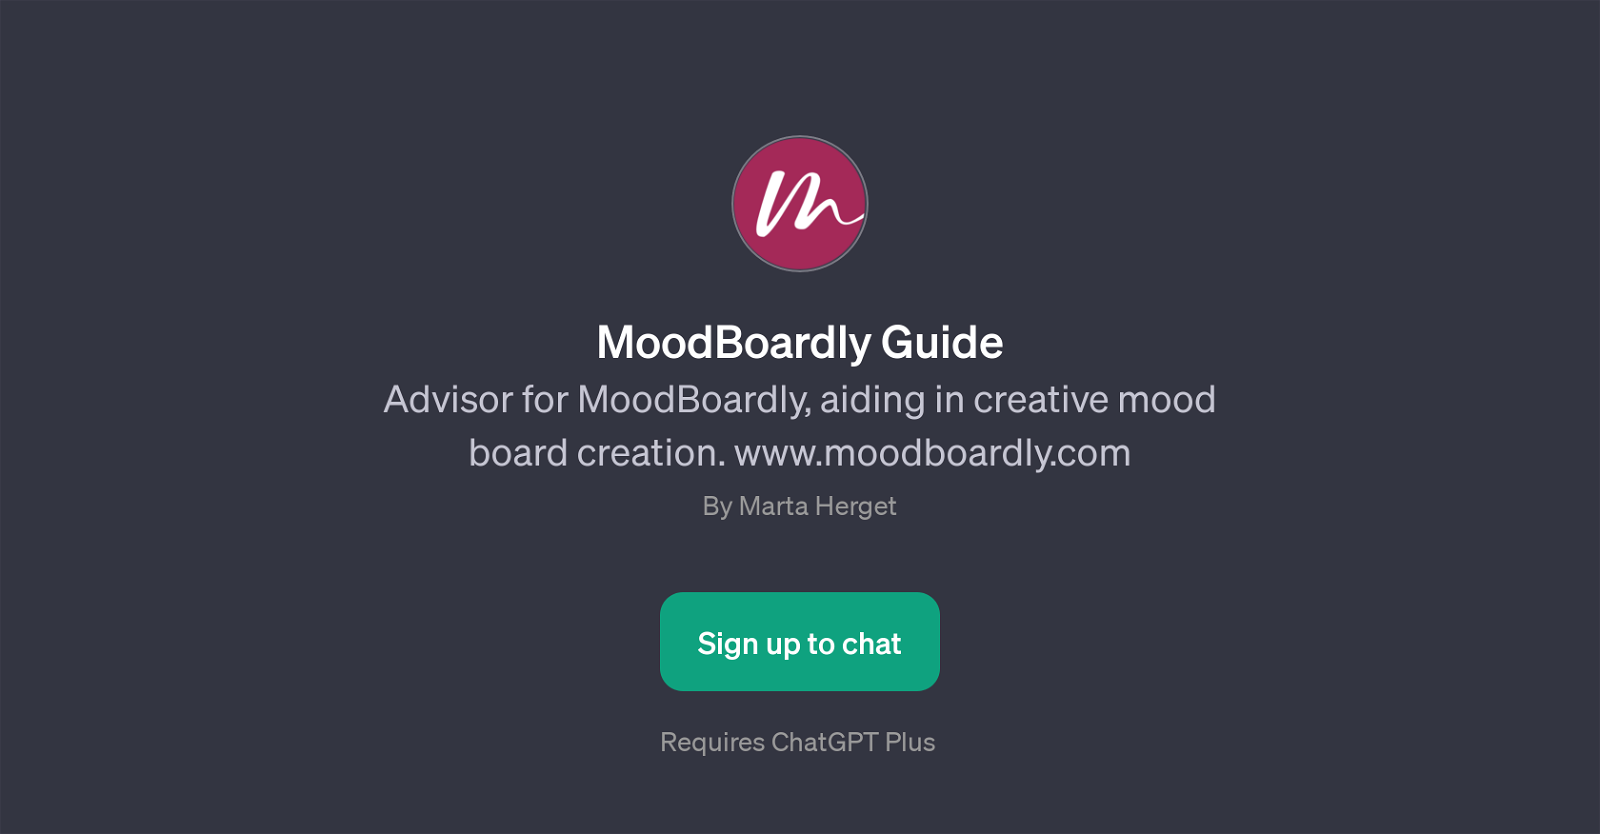 MoodBoardly Guide website